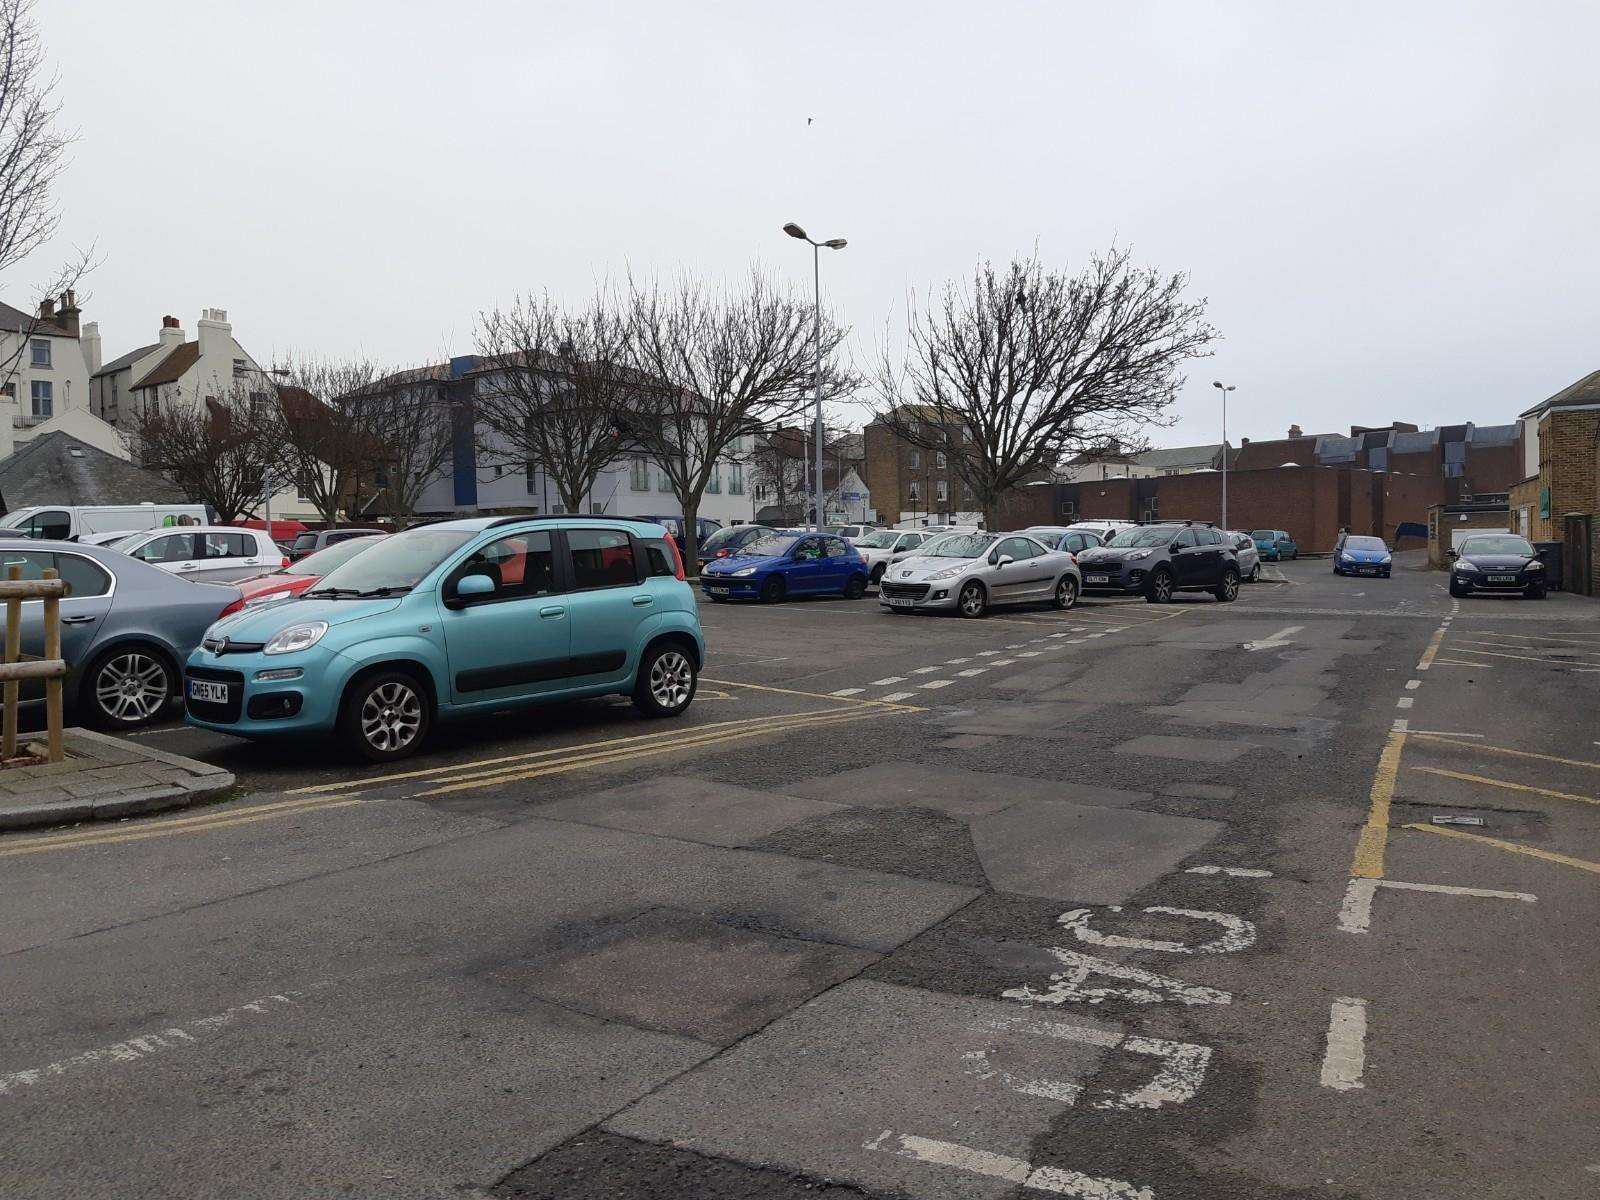 The surface of Middle Street car park by Deal Library is nearly 25 years old